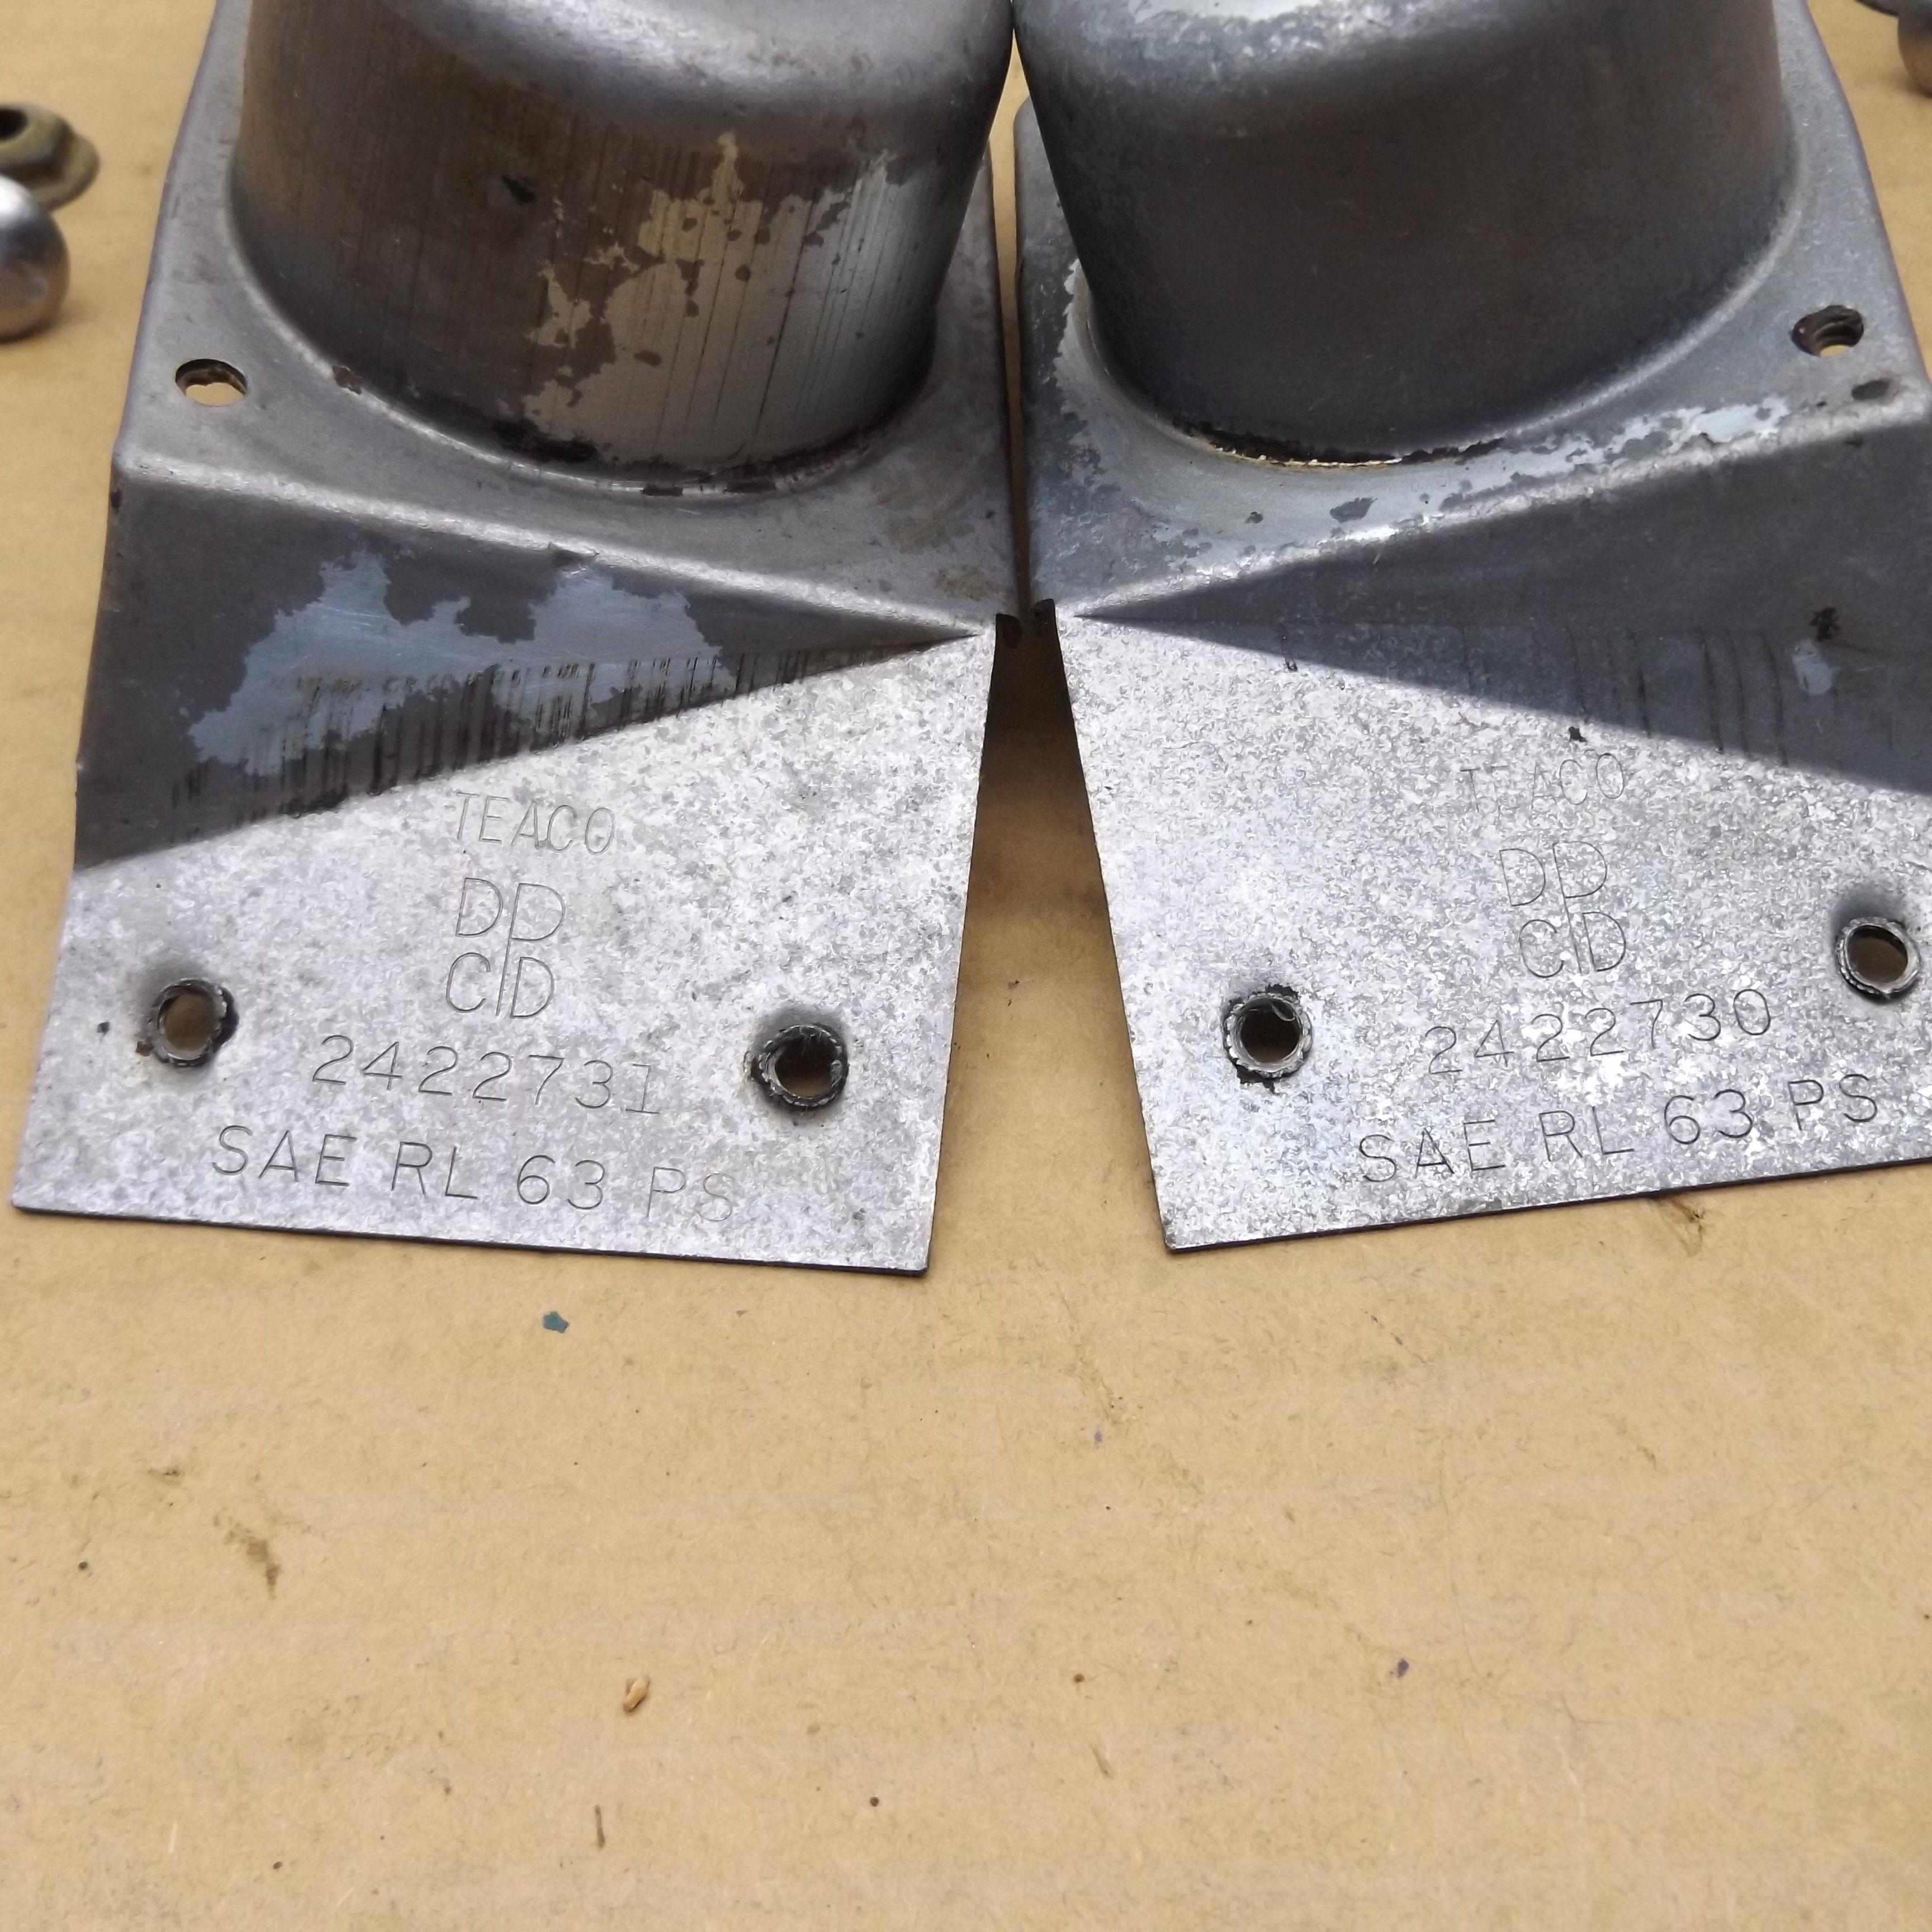 part numbers stamped on housings